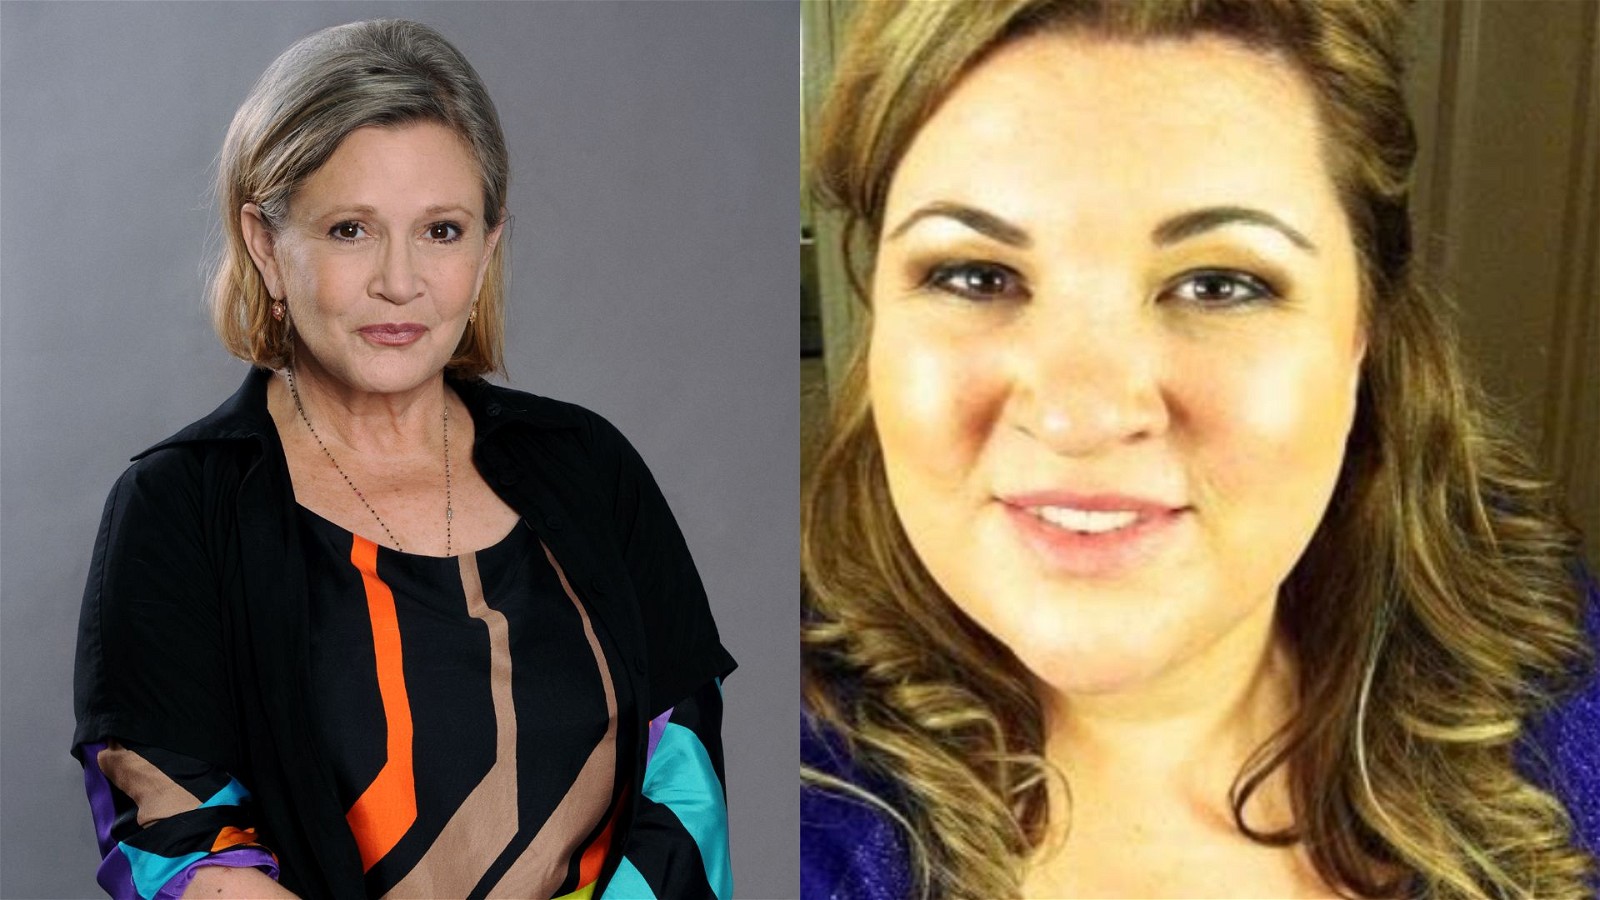 Carrie Fisher and Heather Ross